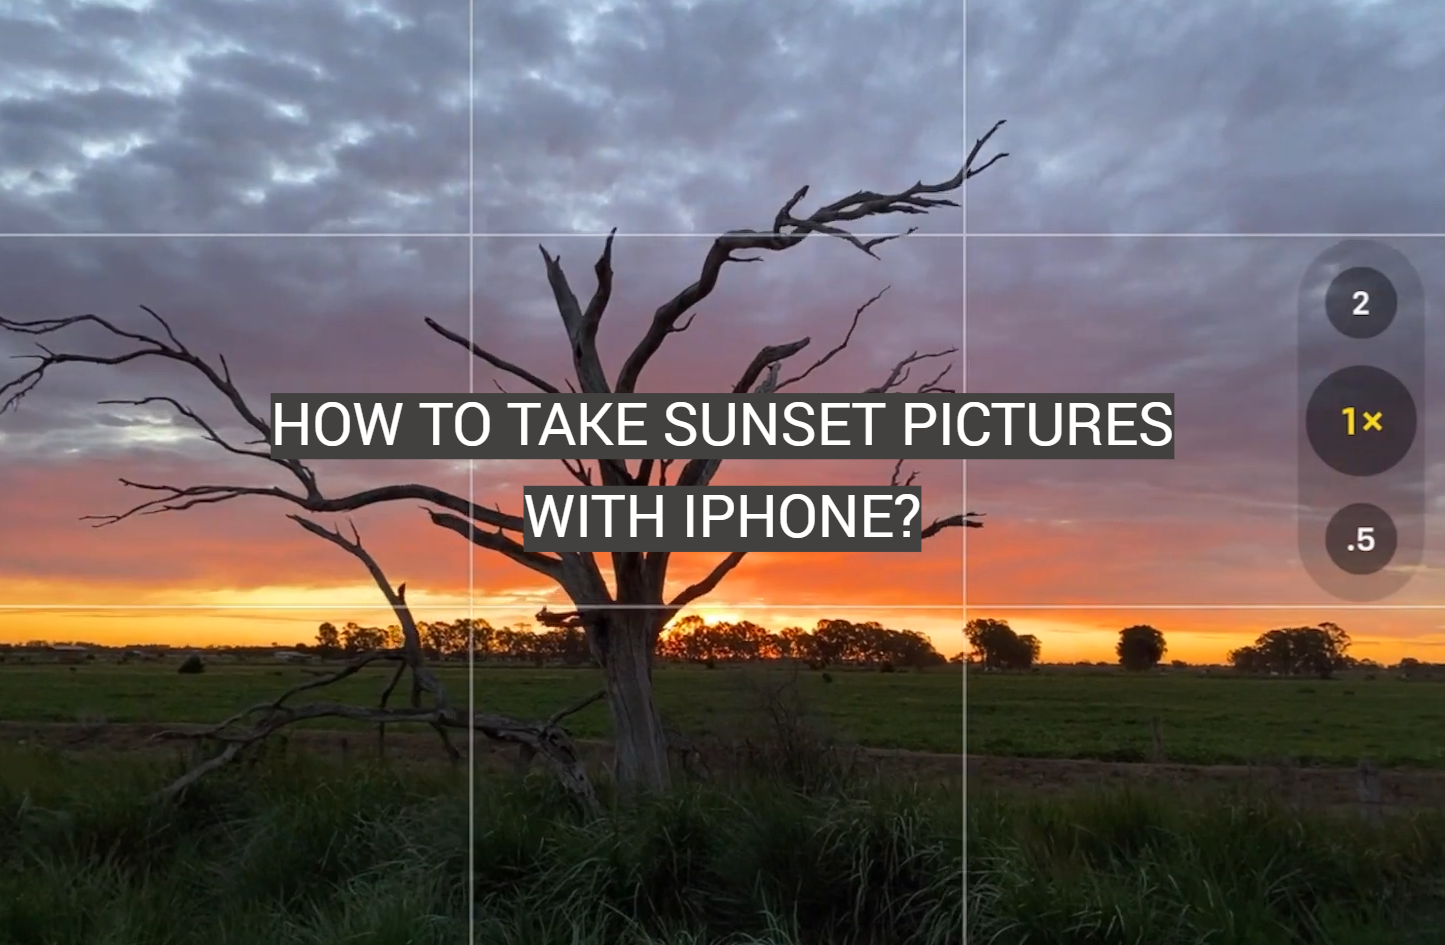 How to Take Sunset Pictures With iPhone?